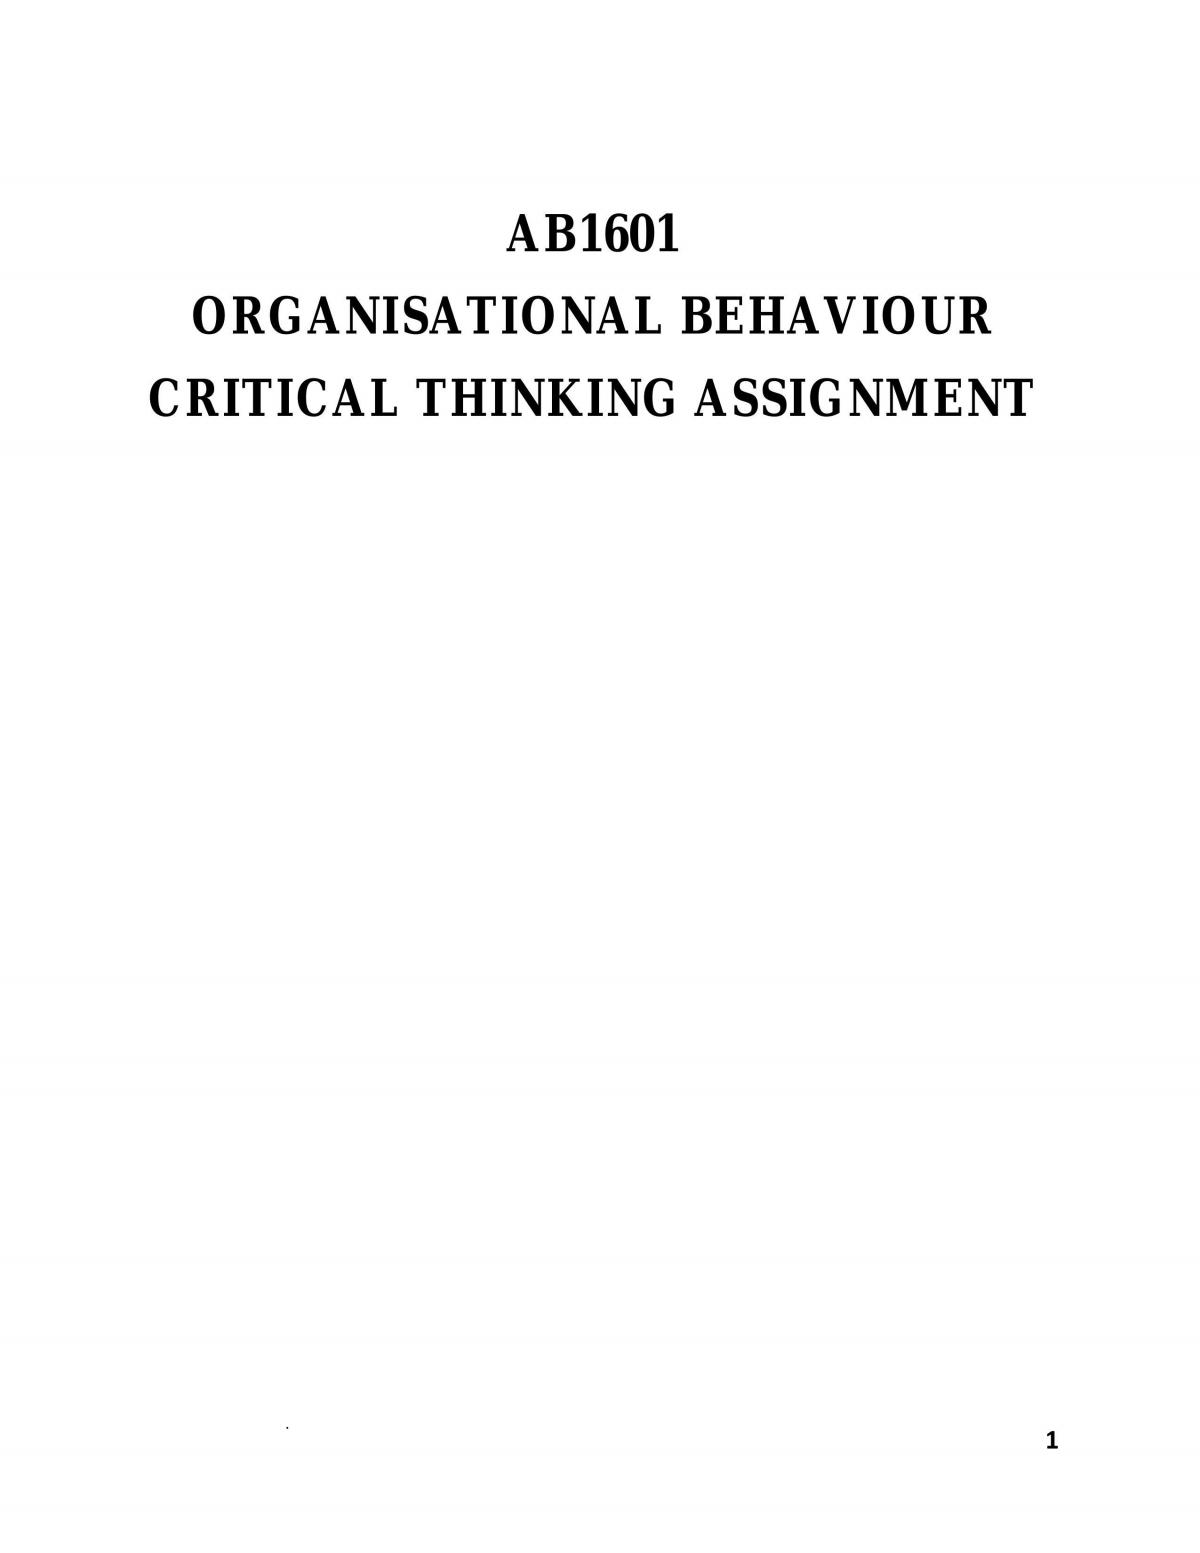 Critical Thinking Assignment - Page 1